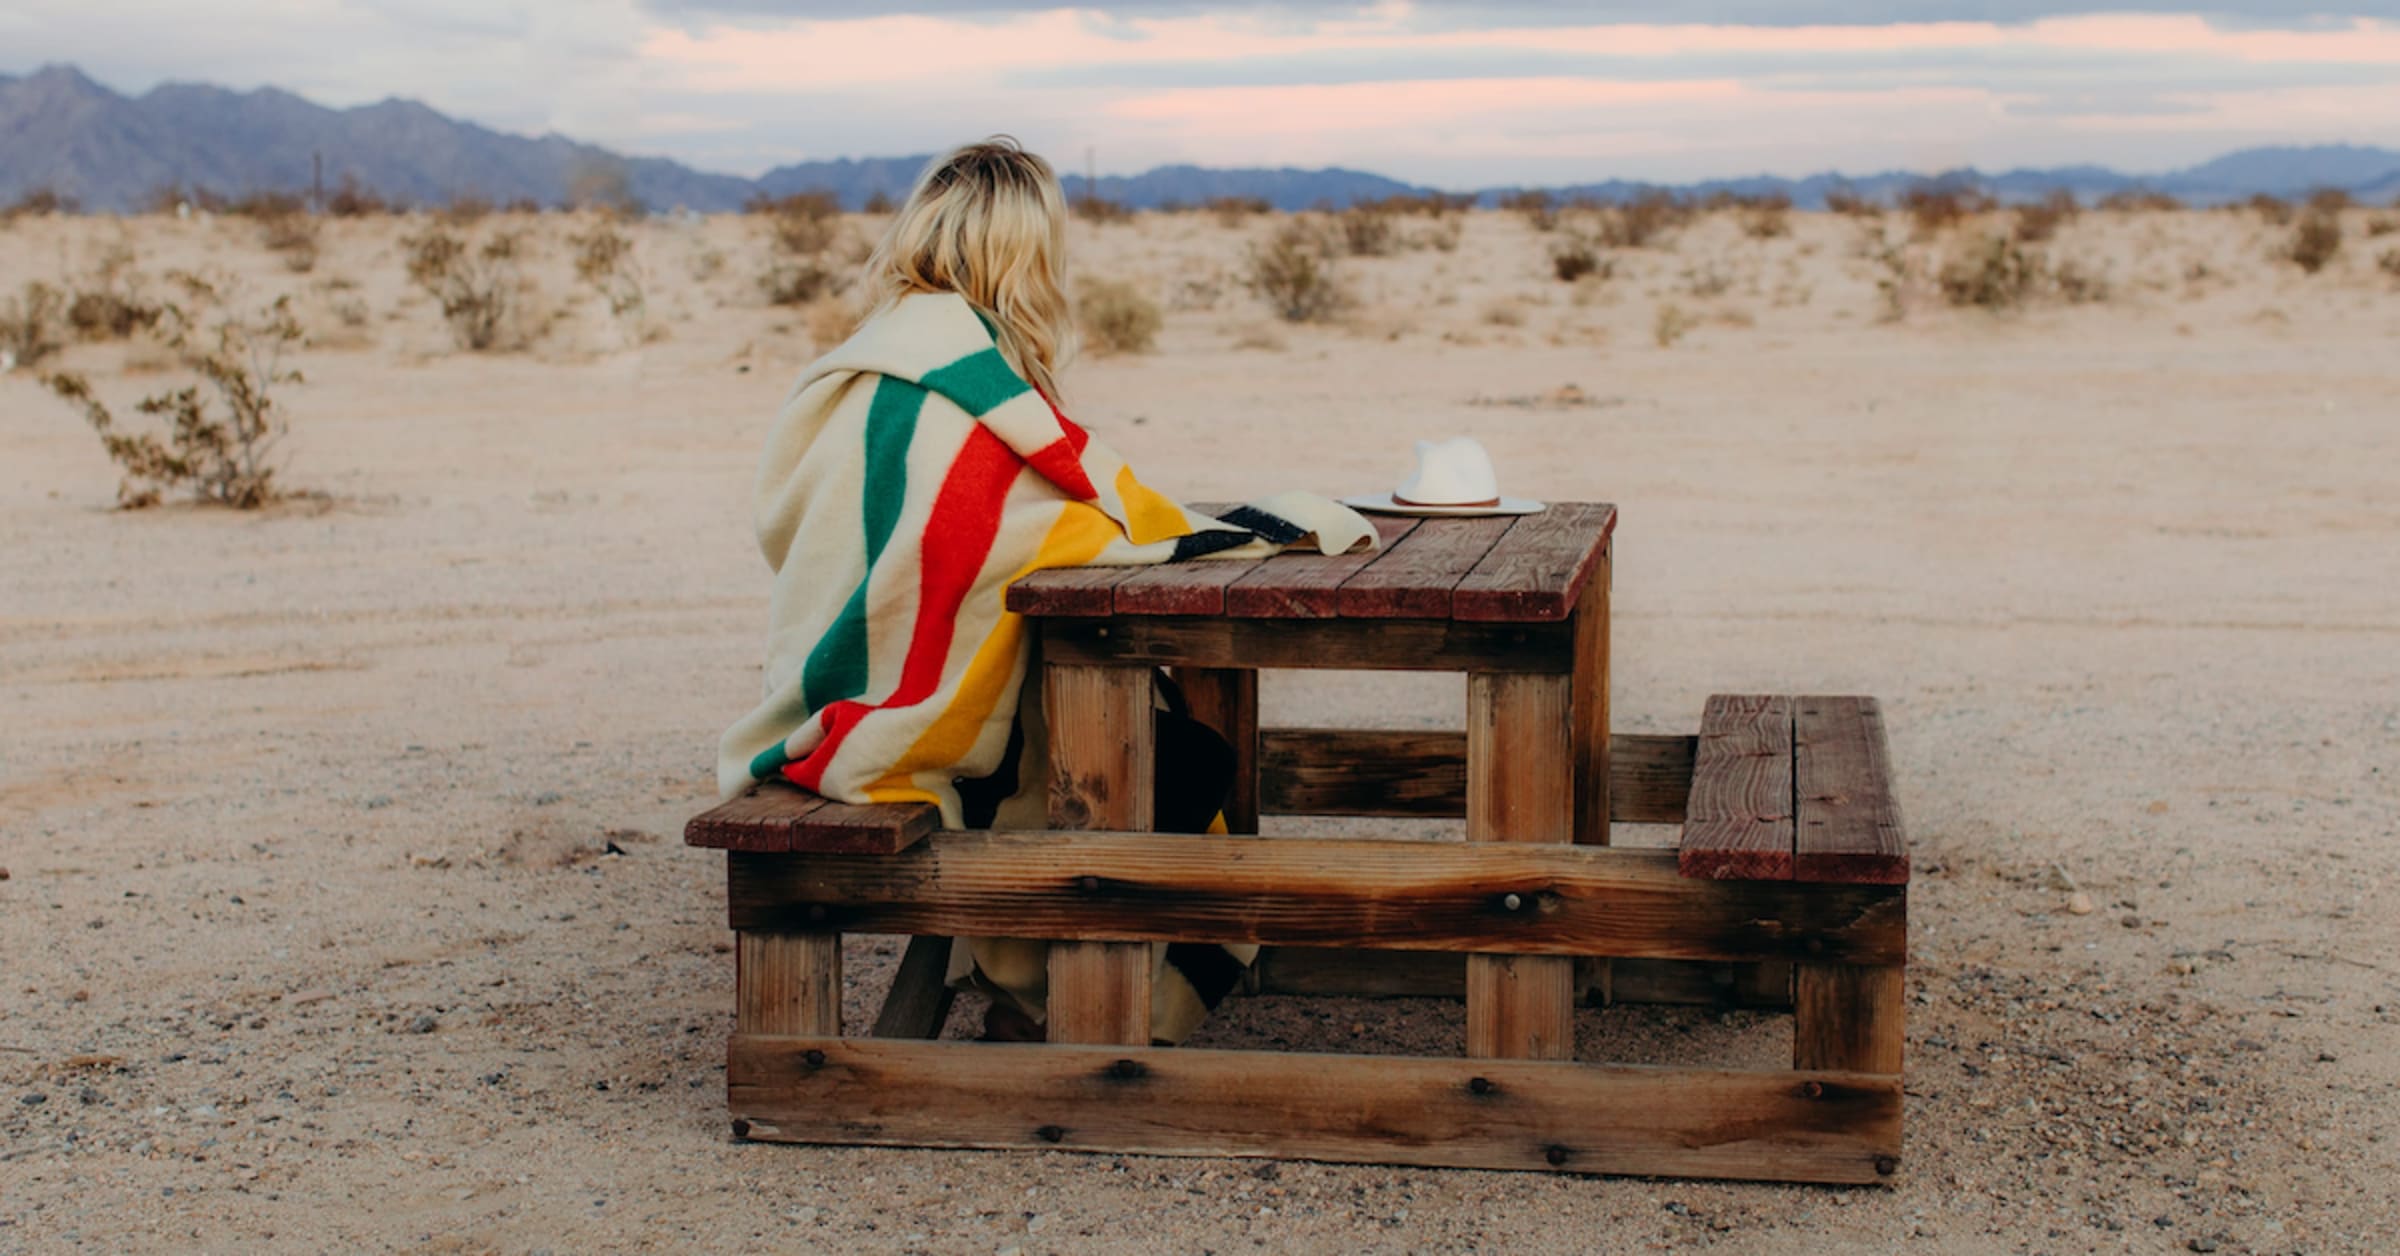 Can You Camp at Joshua Tree?